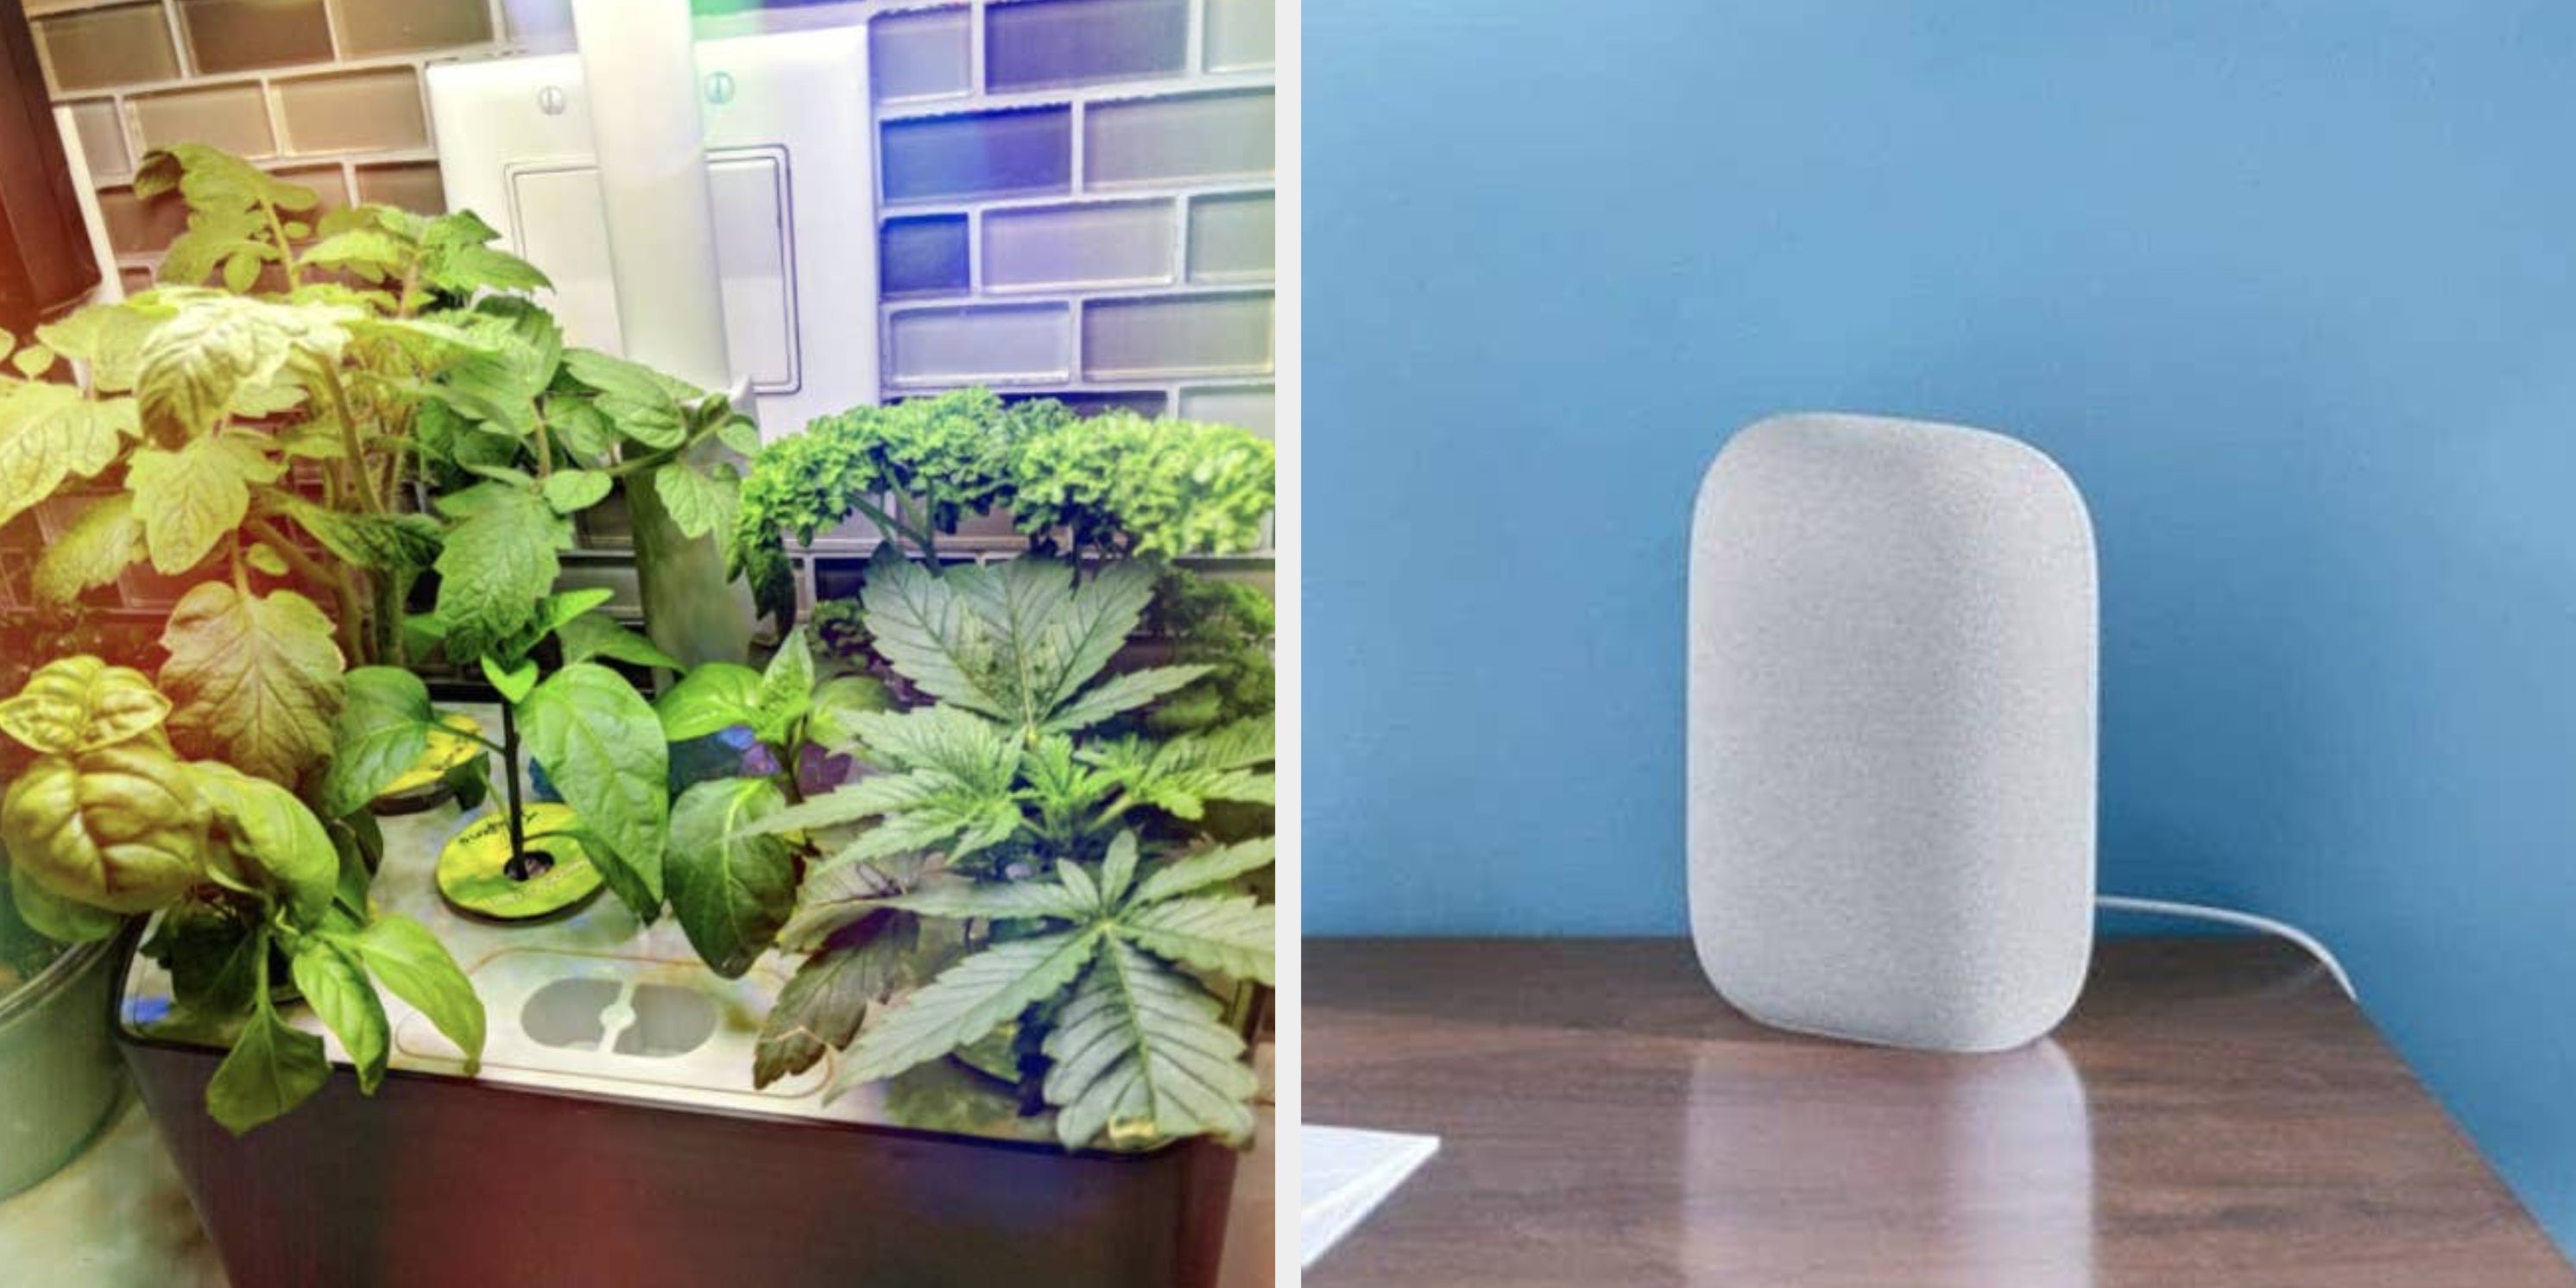 33 Intriguing Gadgets And Tech Products You'll Want To Try